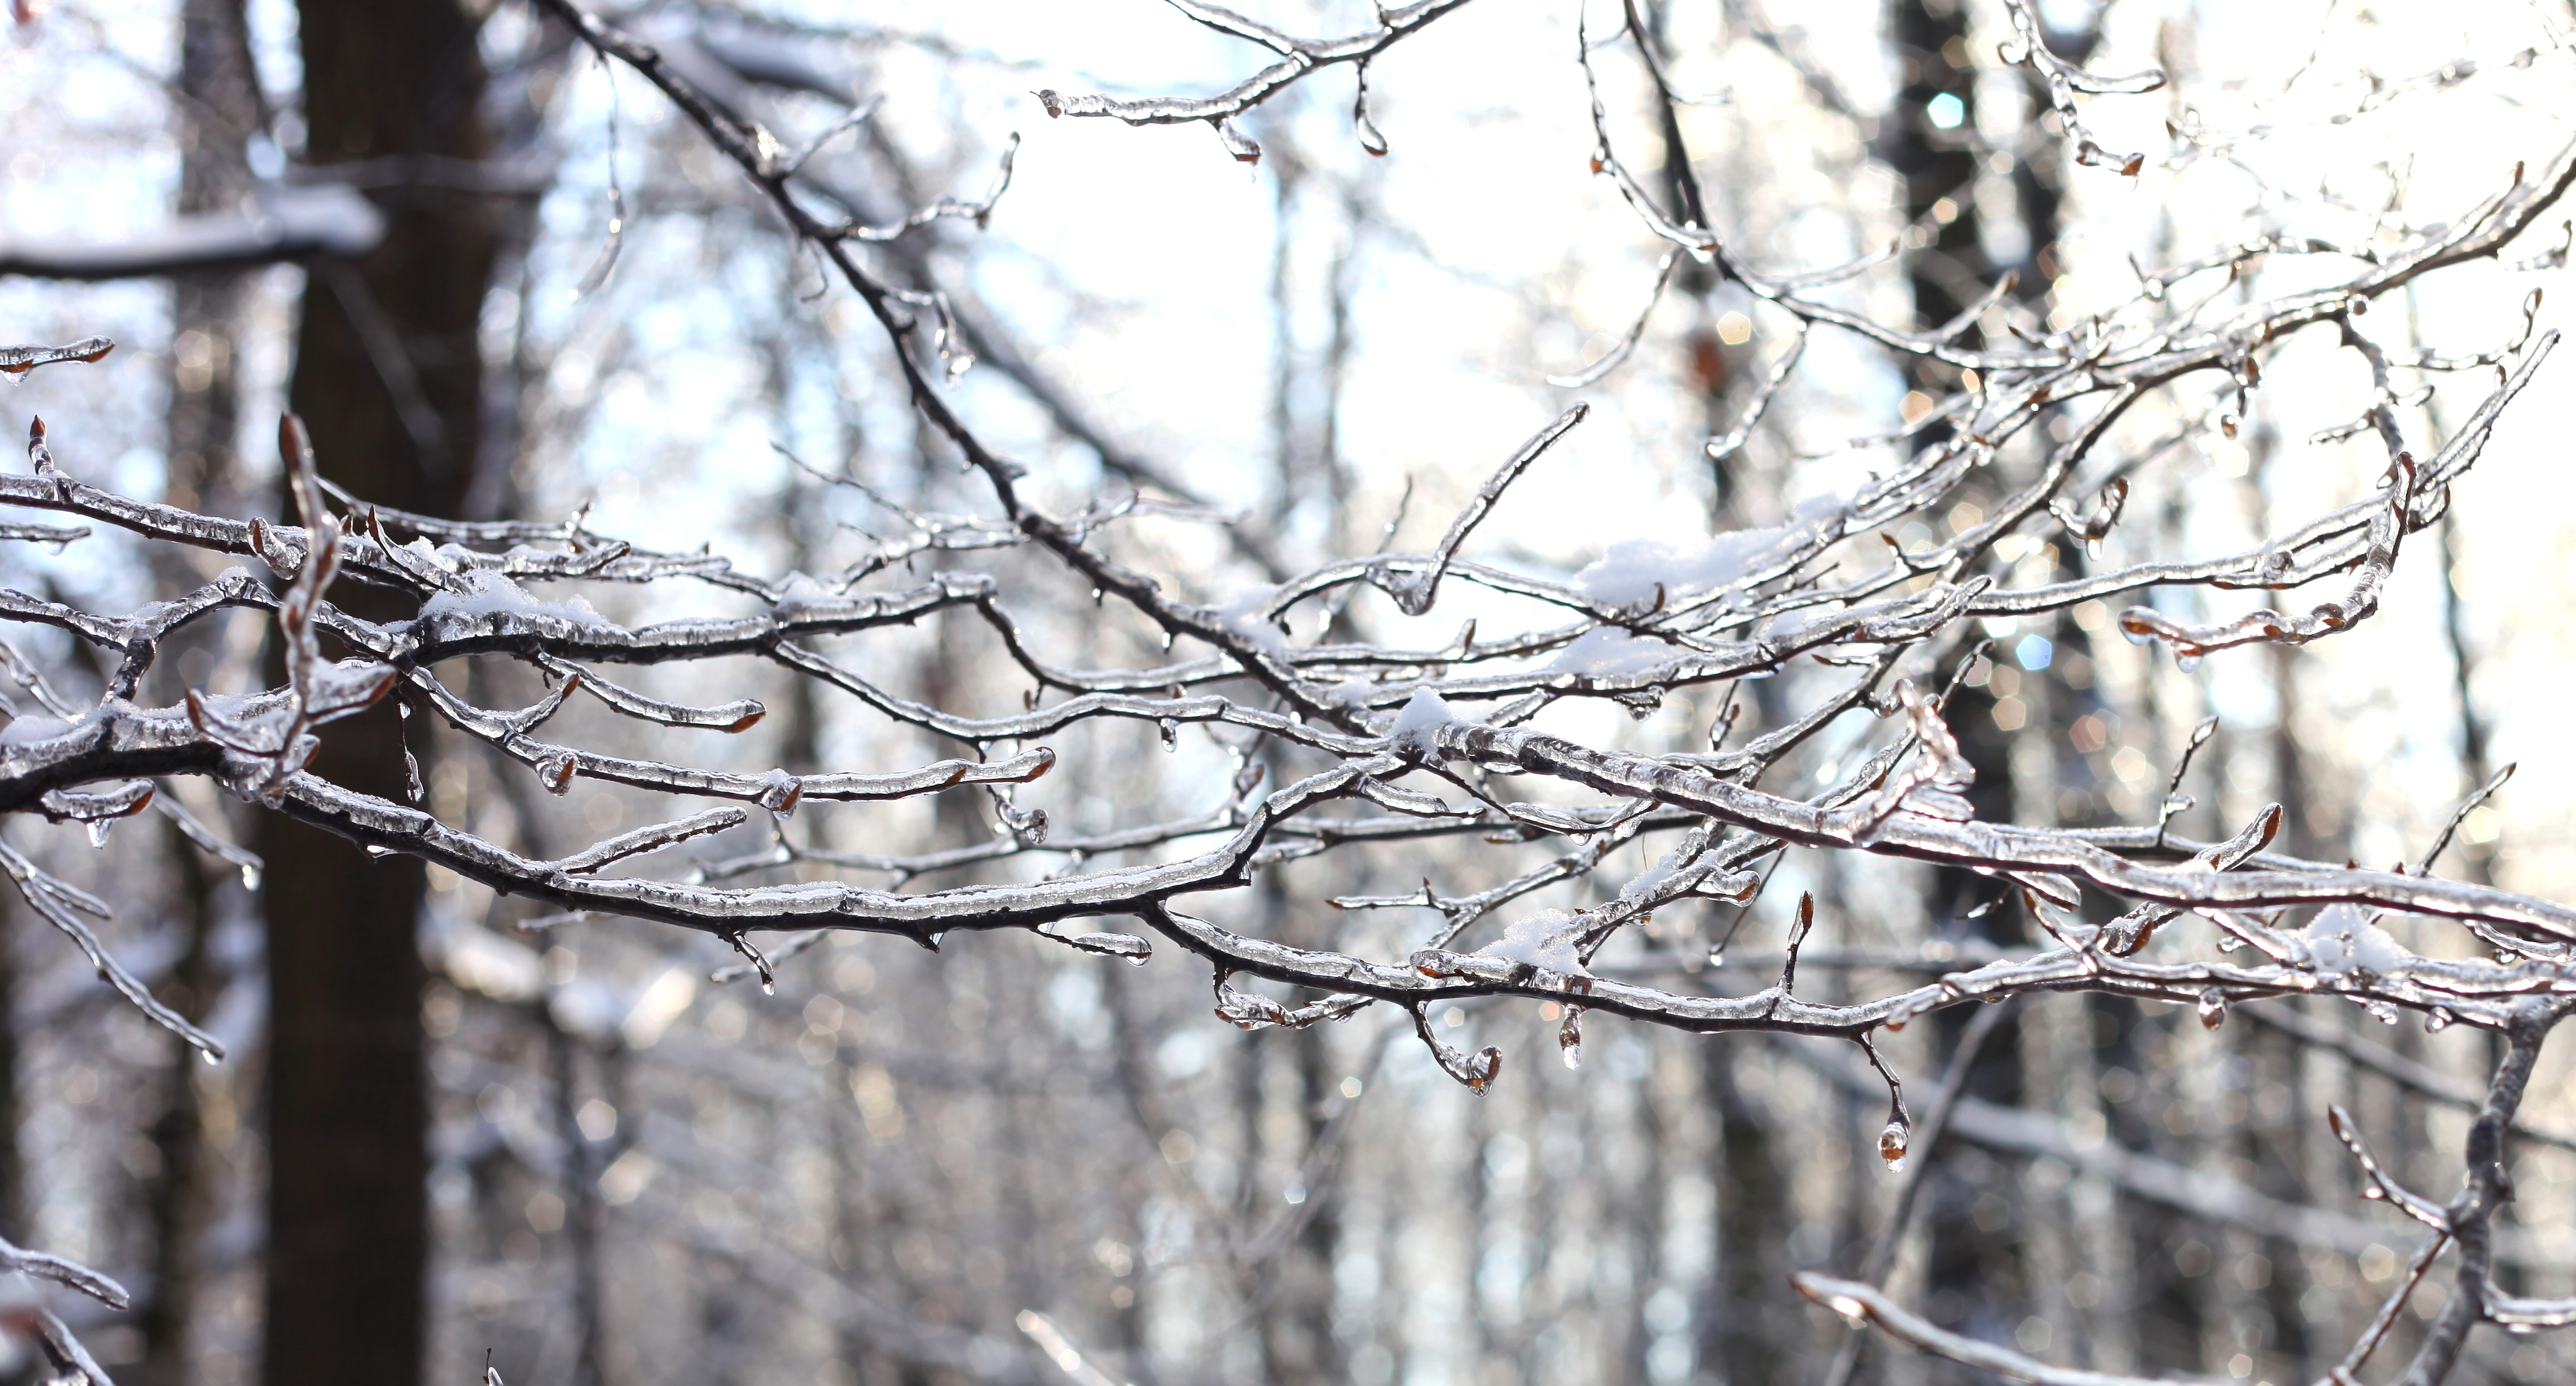 trees with their branches covered with ice, photo 2